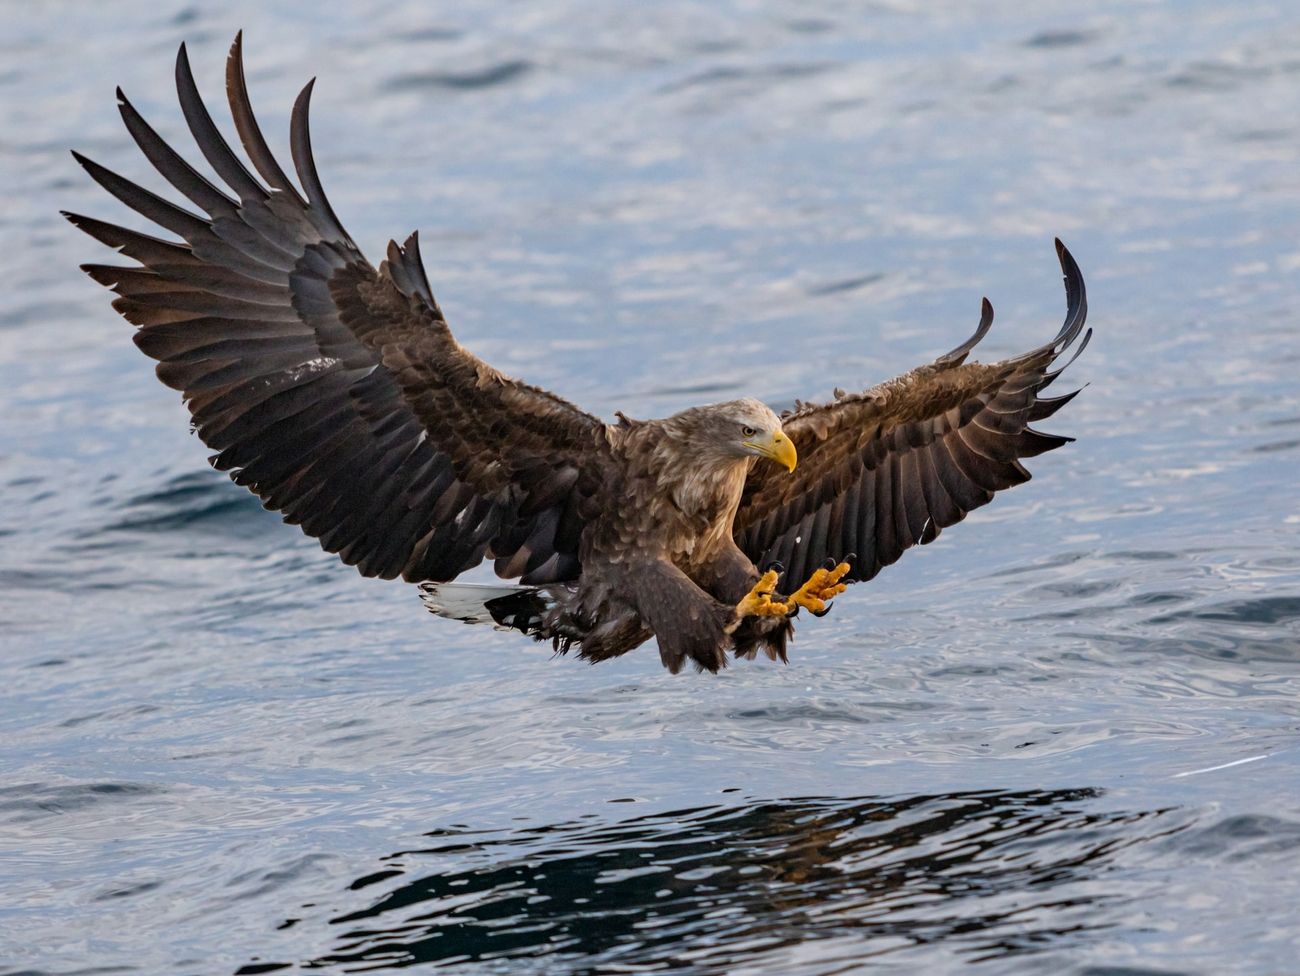 7 Tips To Improve Your Birds In Flight Photography